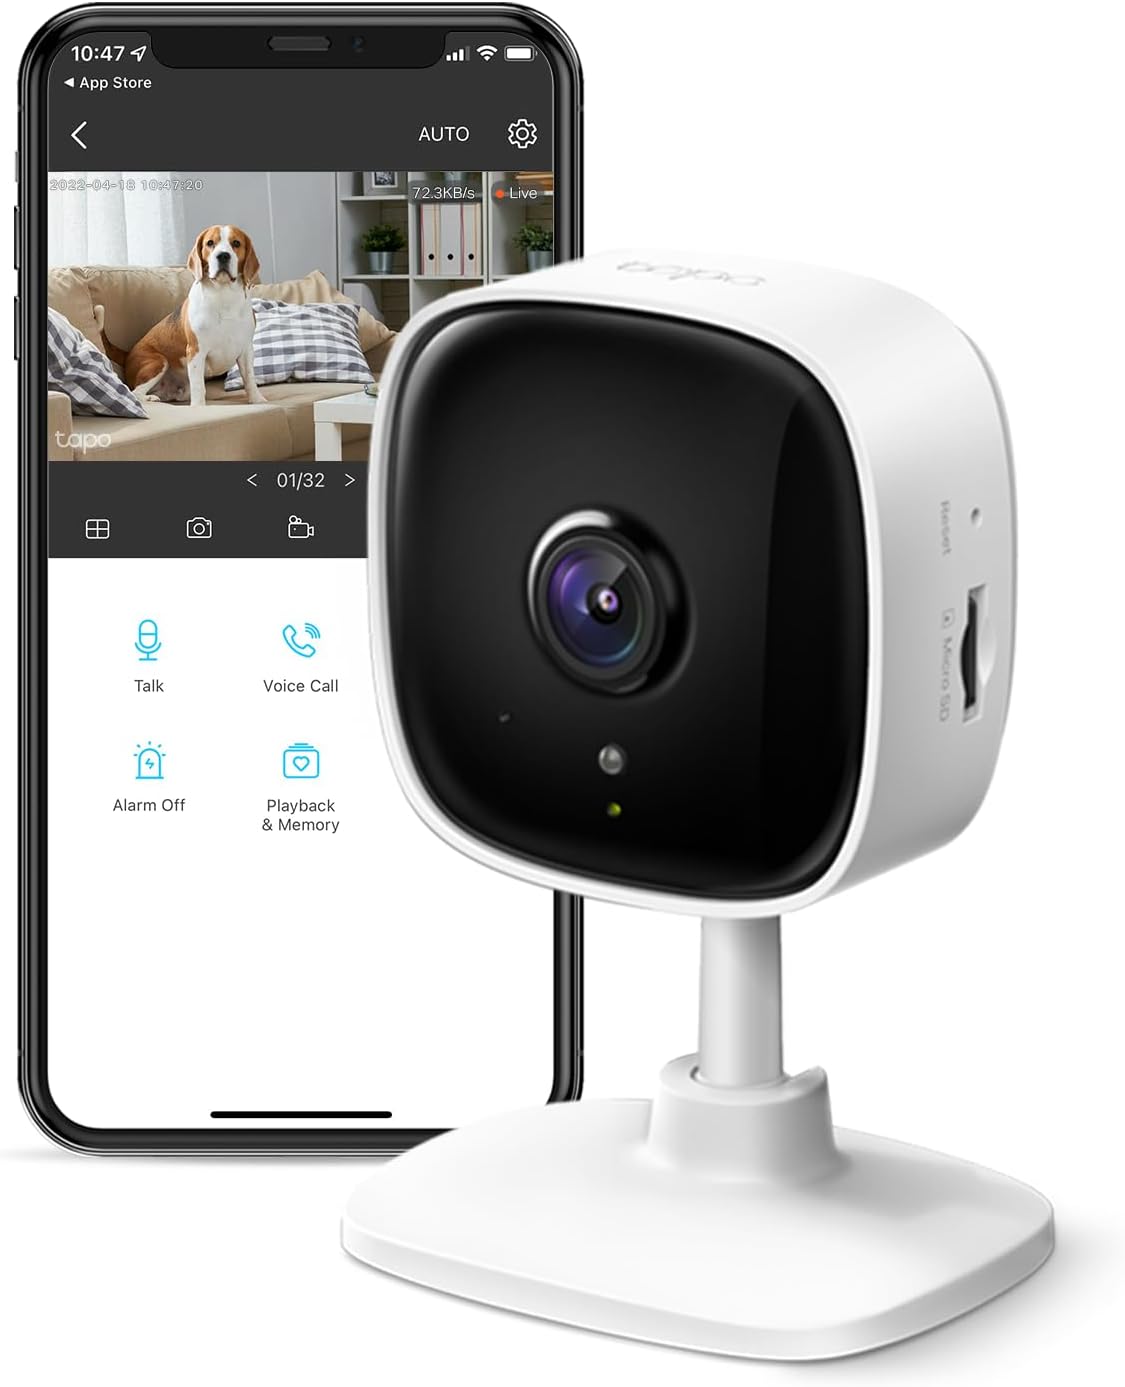 TP-Link Tapo 1080P Indoor Security Camera for Baby Monitor, Dog Camera w/ Motion Detection, 2-Way Audio Siren, Night Vision, Cloud  SD Card Storage, Works w/ Alexa  Google Home (Tapo C100)